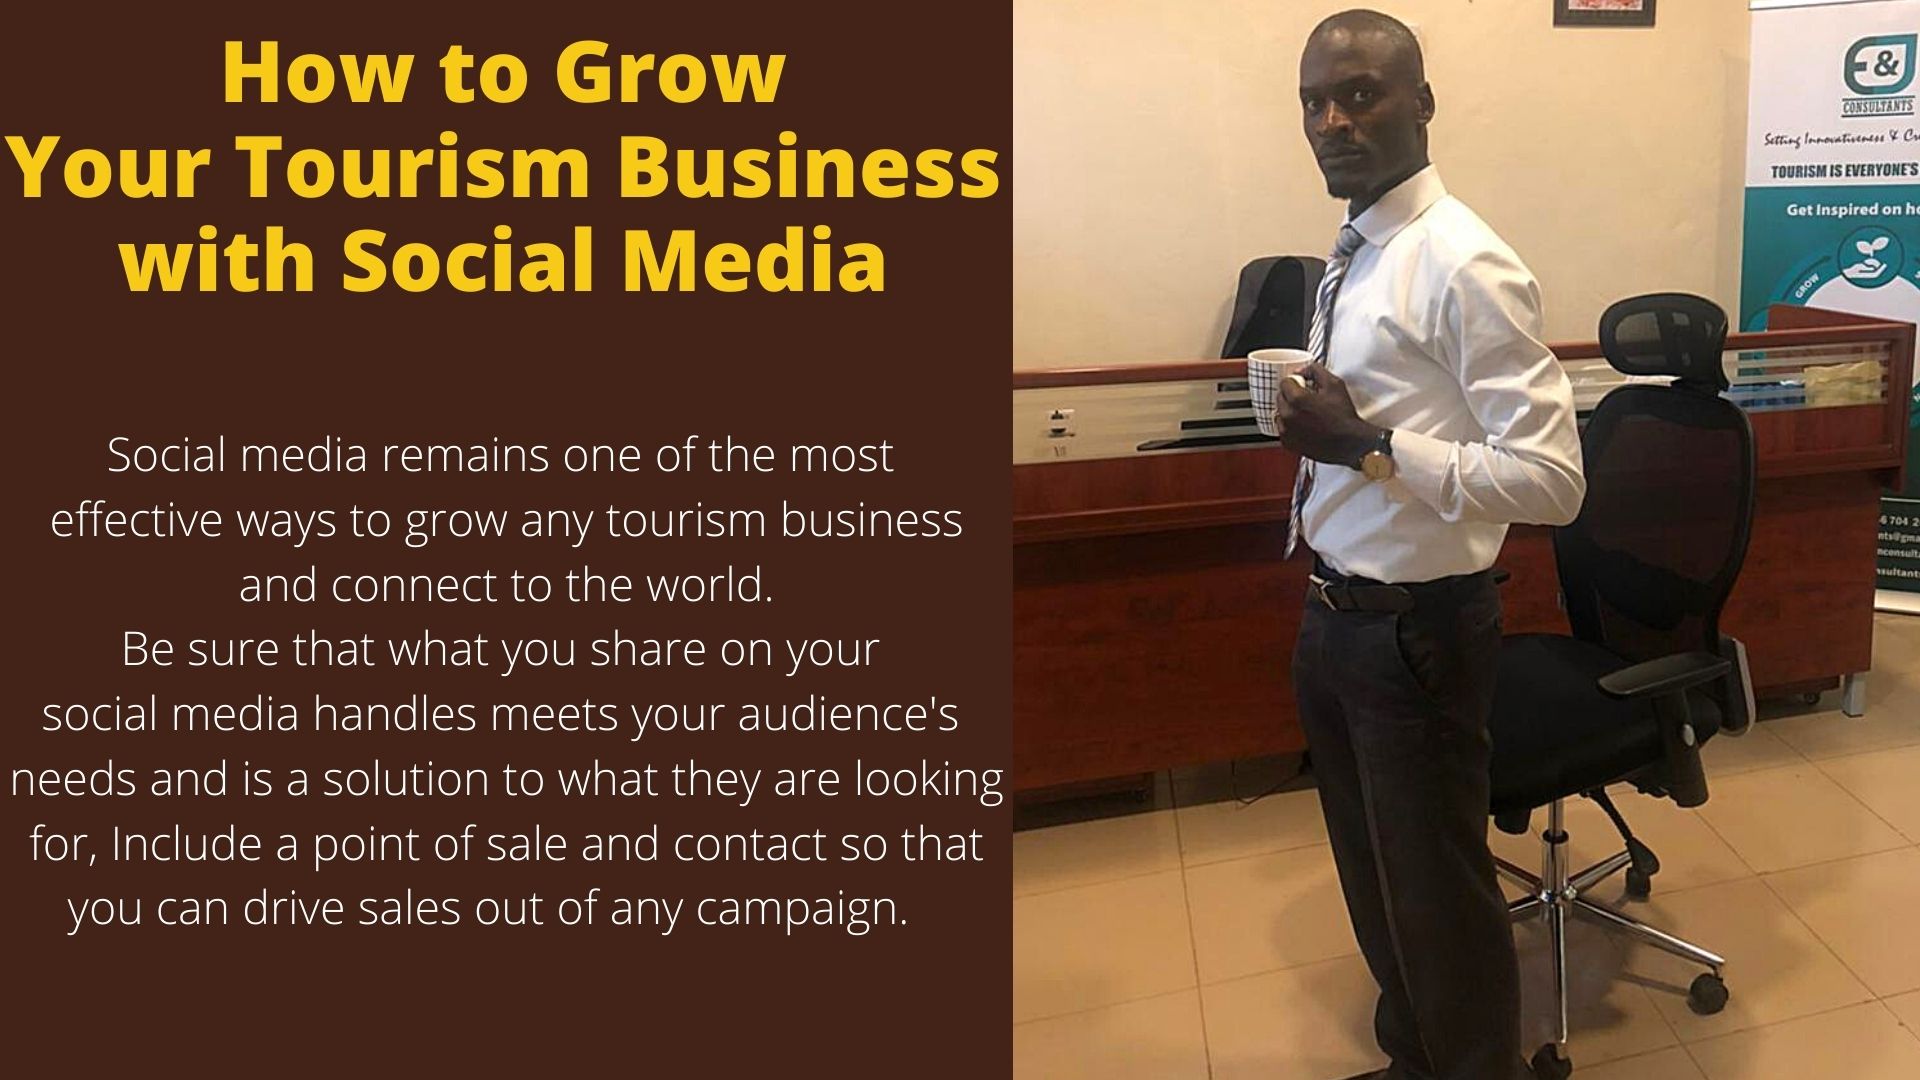 Grow Your Tourism Business With Social Media